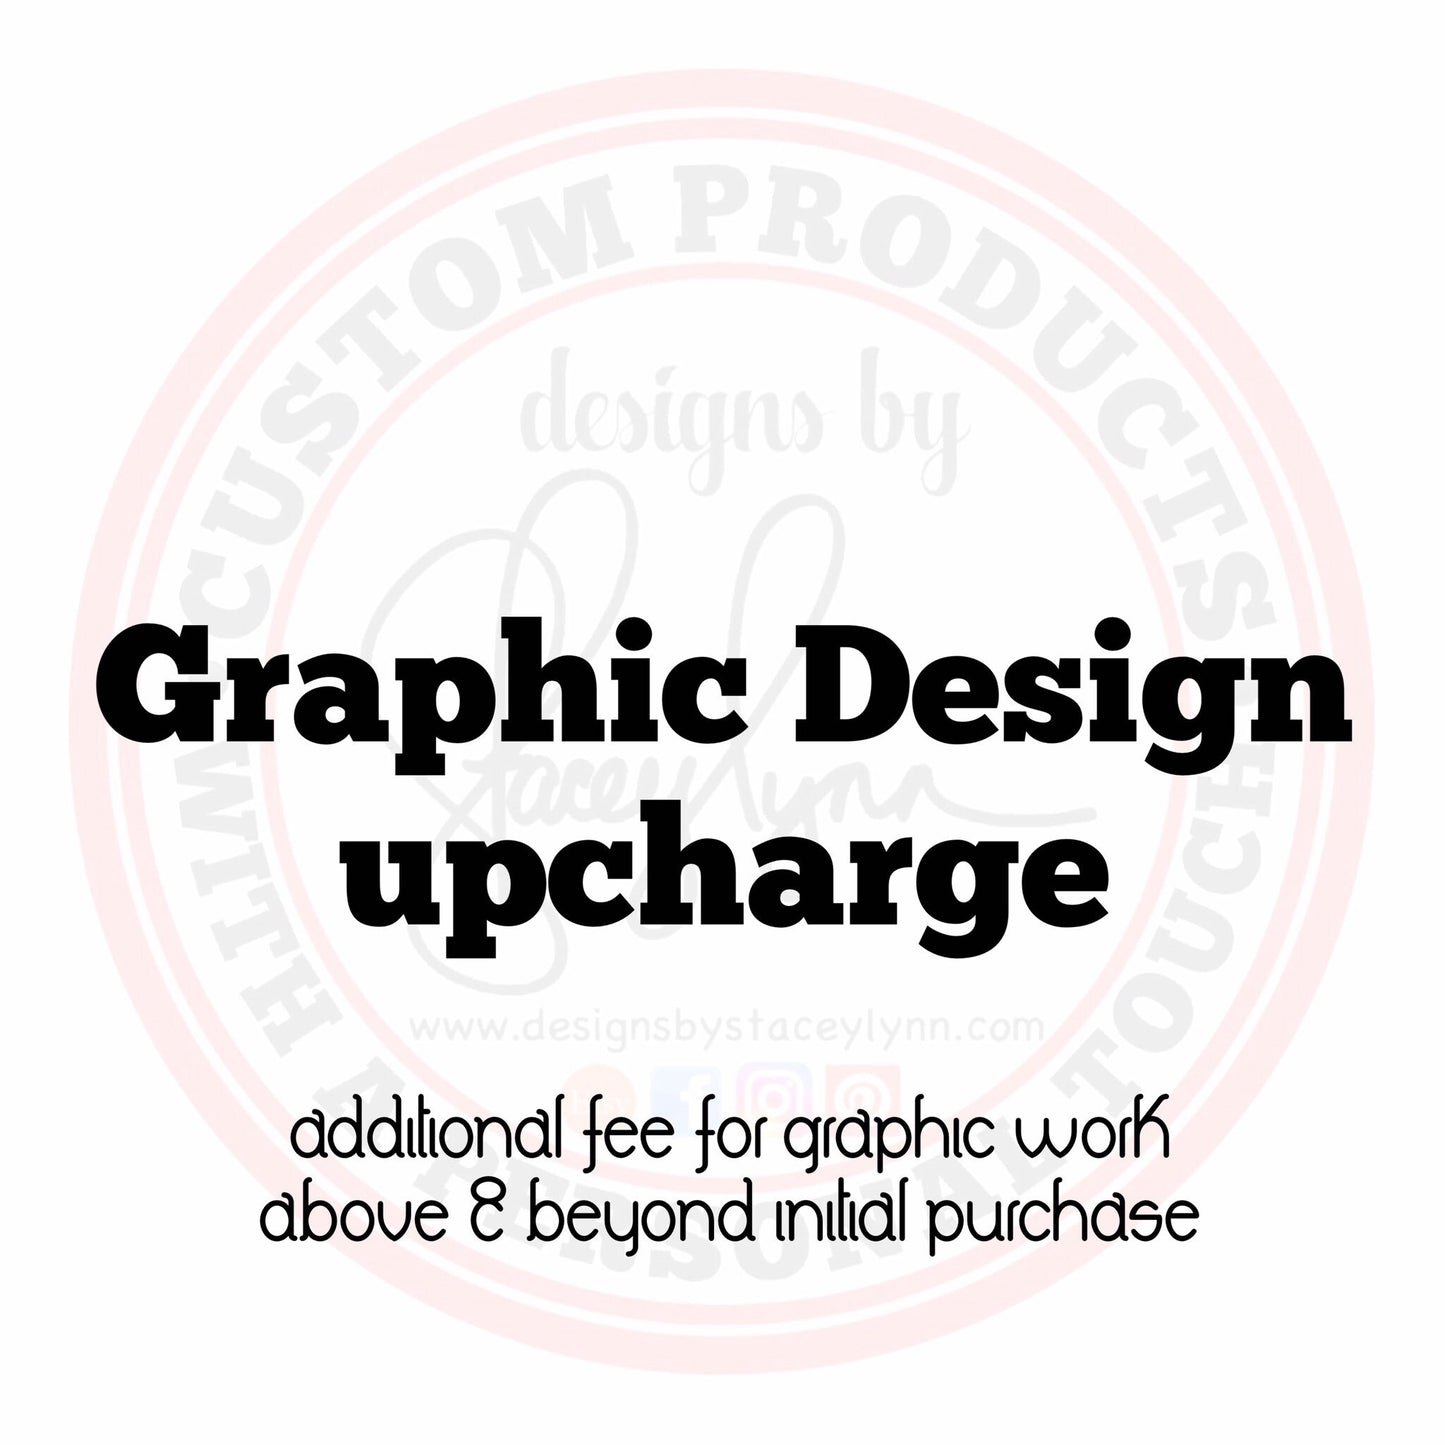 Graphic Design upcharge